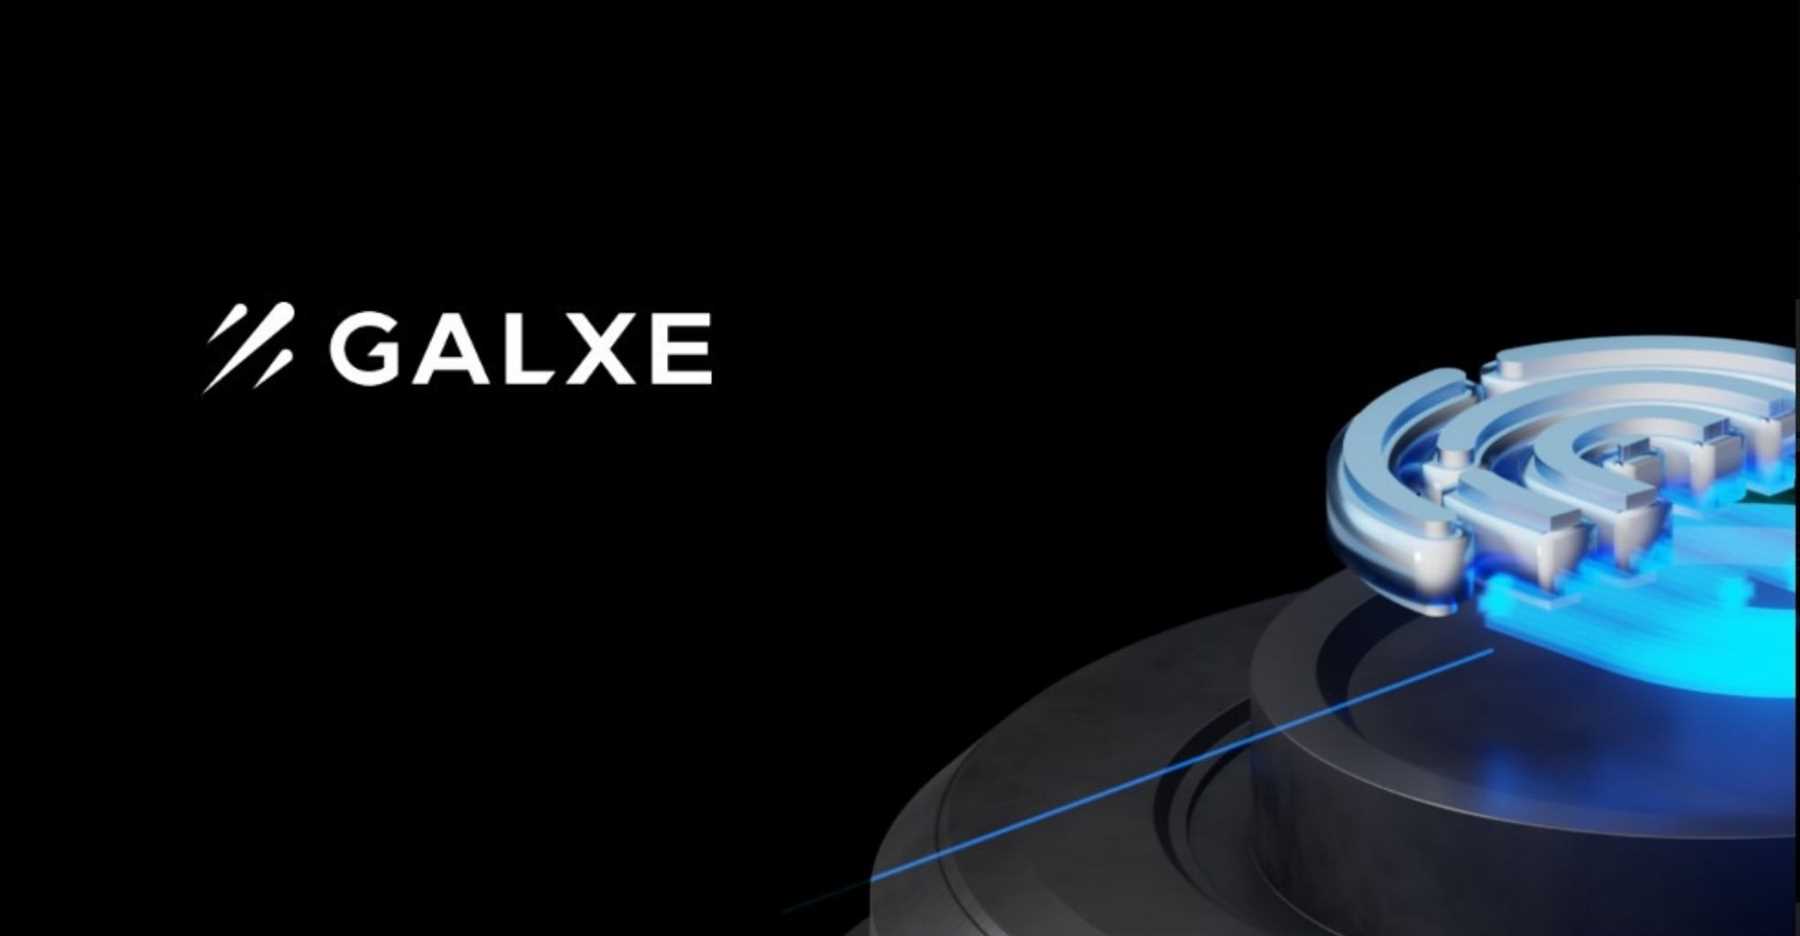 The unique features of Crypto Galxe